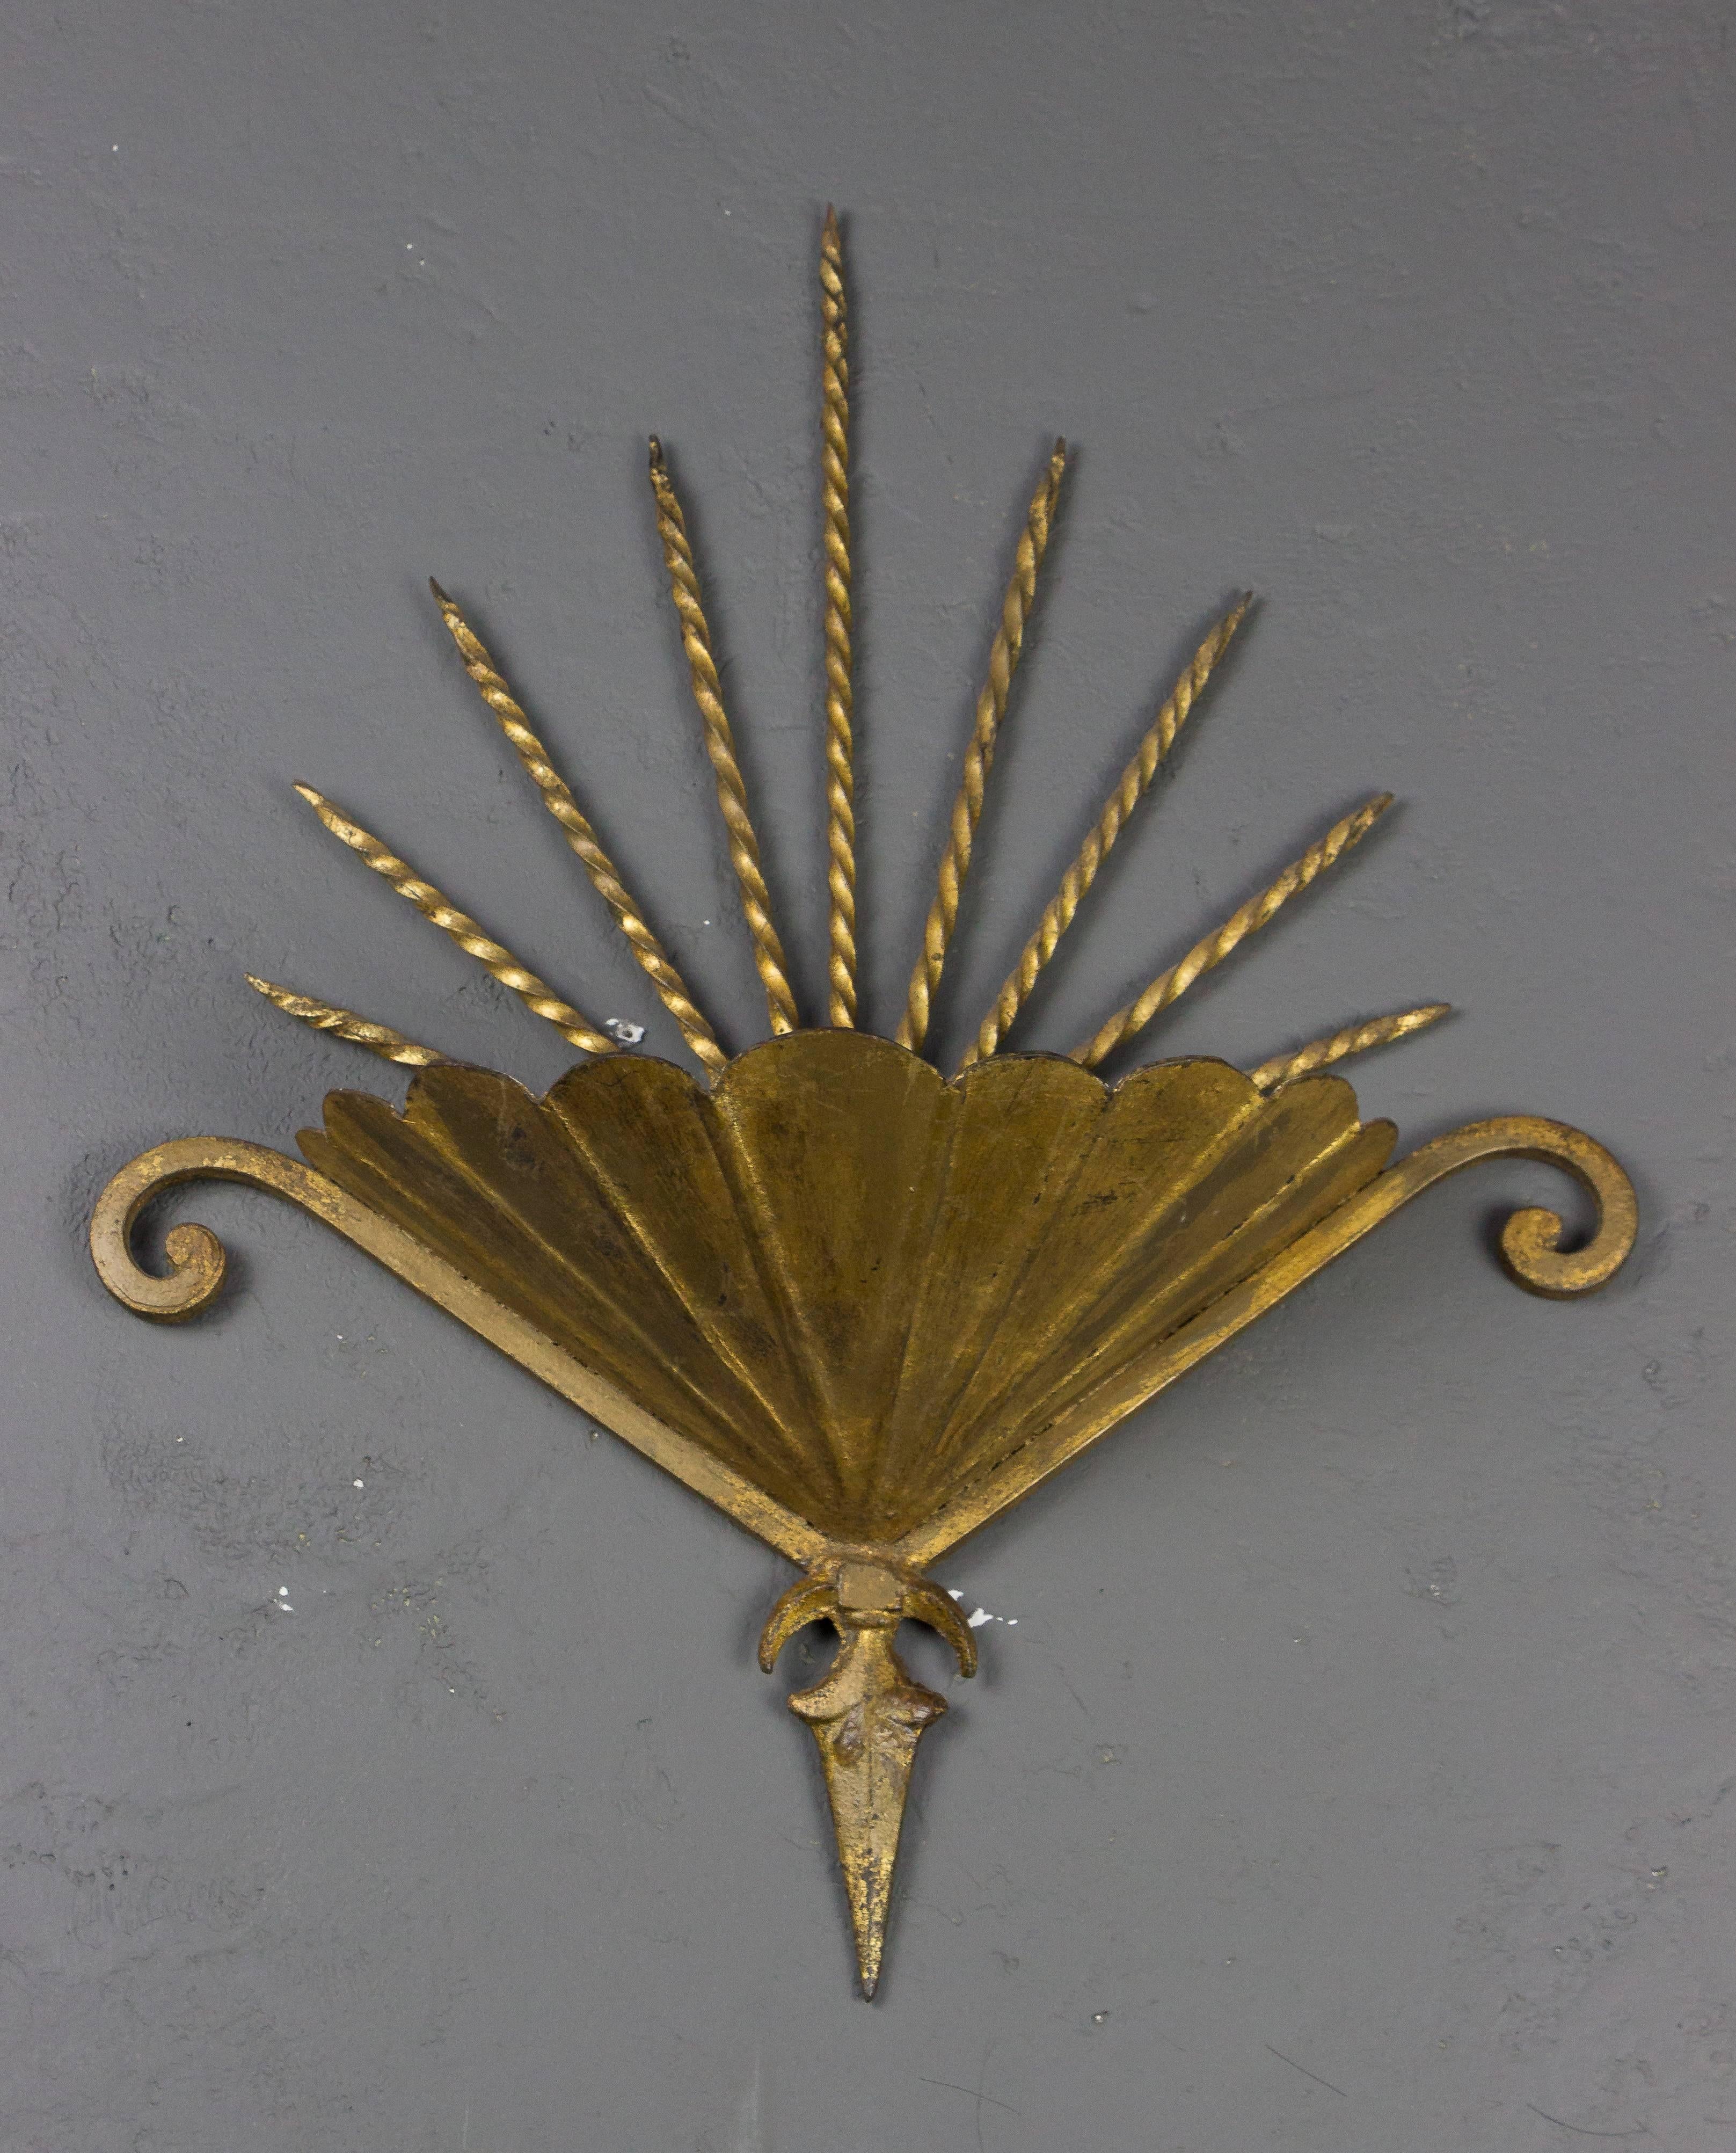 Very dramatic gilt wall sconce. The light is enclosed, to provide indirect lighting. Spanish, 1950s. Very good vintage condition. Wired for showroom display, not  UL Code.

Ref #: LS1106-02

Dimensions: 23